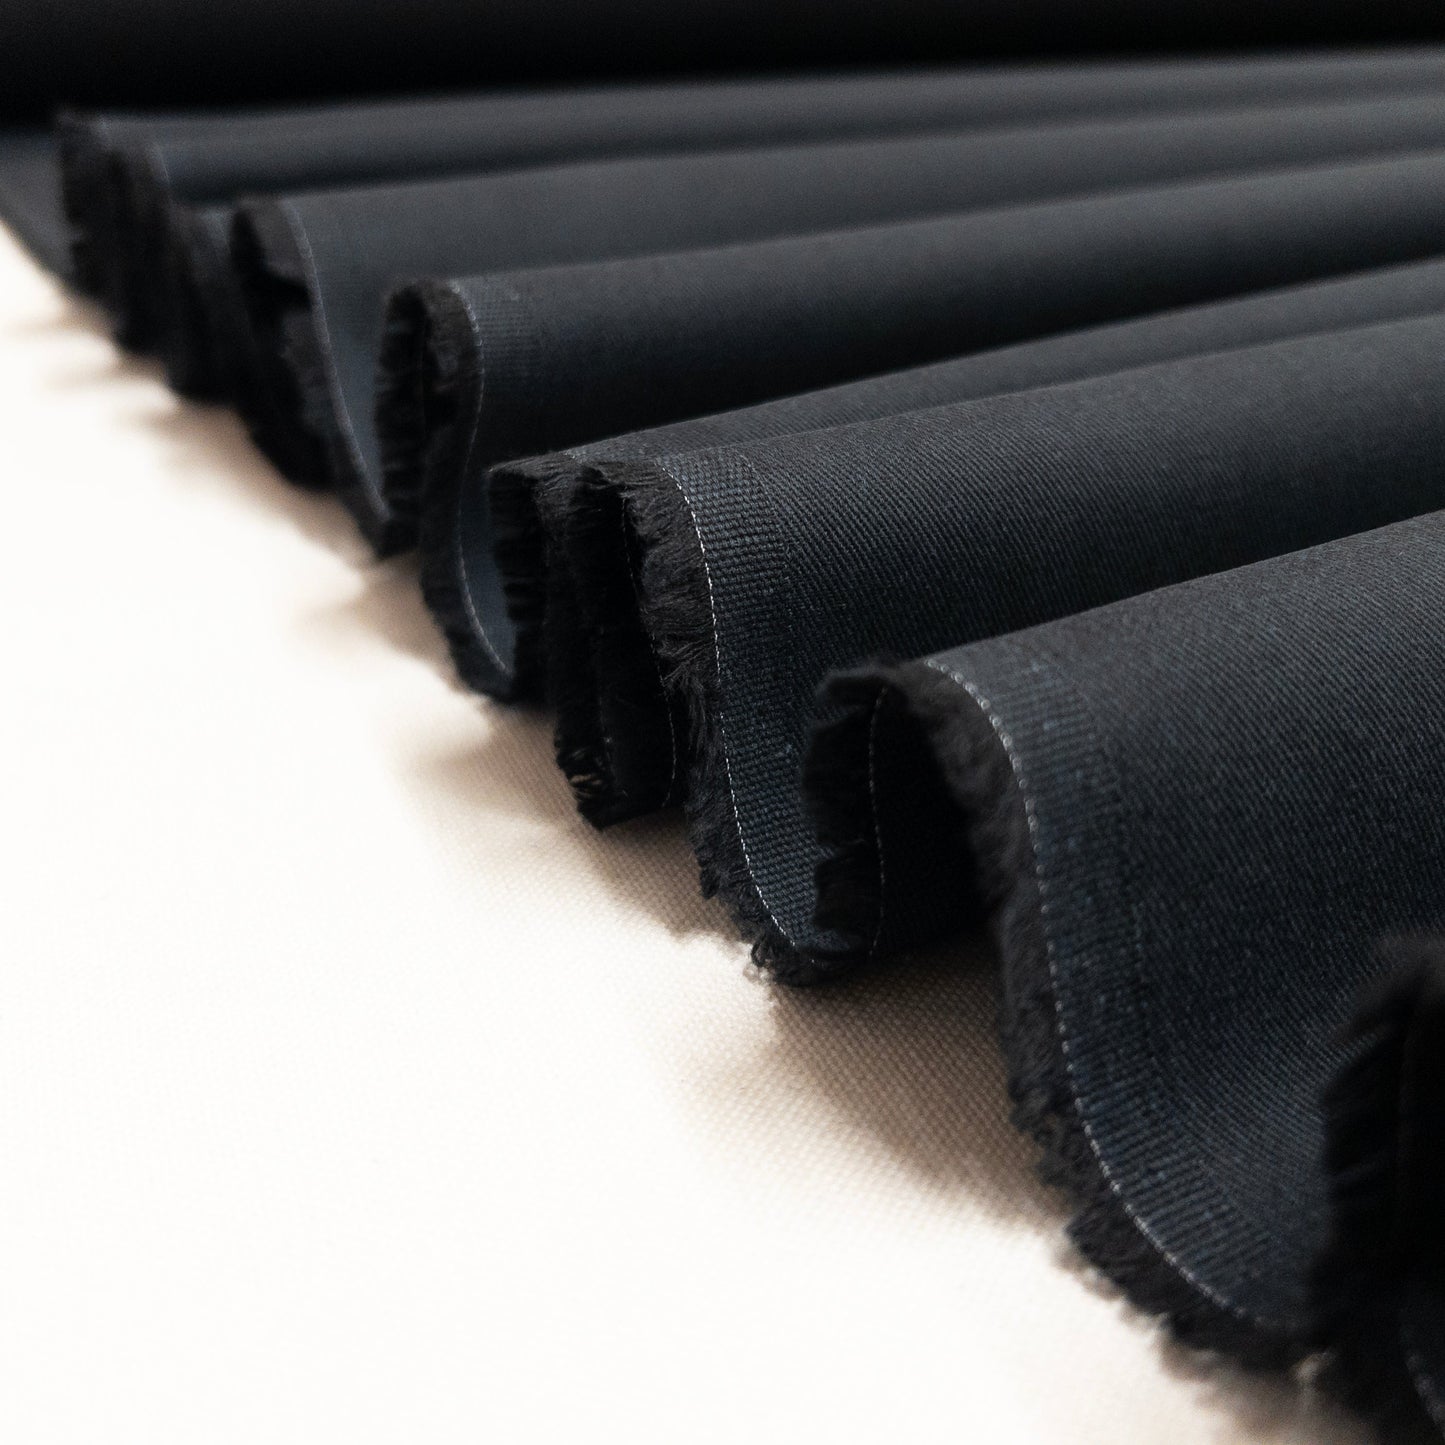 Remnant: Sanded Cotton Twill in Black 1 1/4 yards